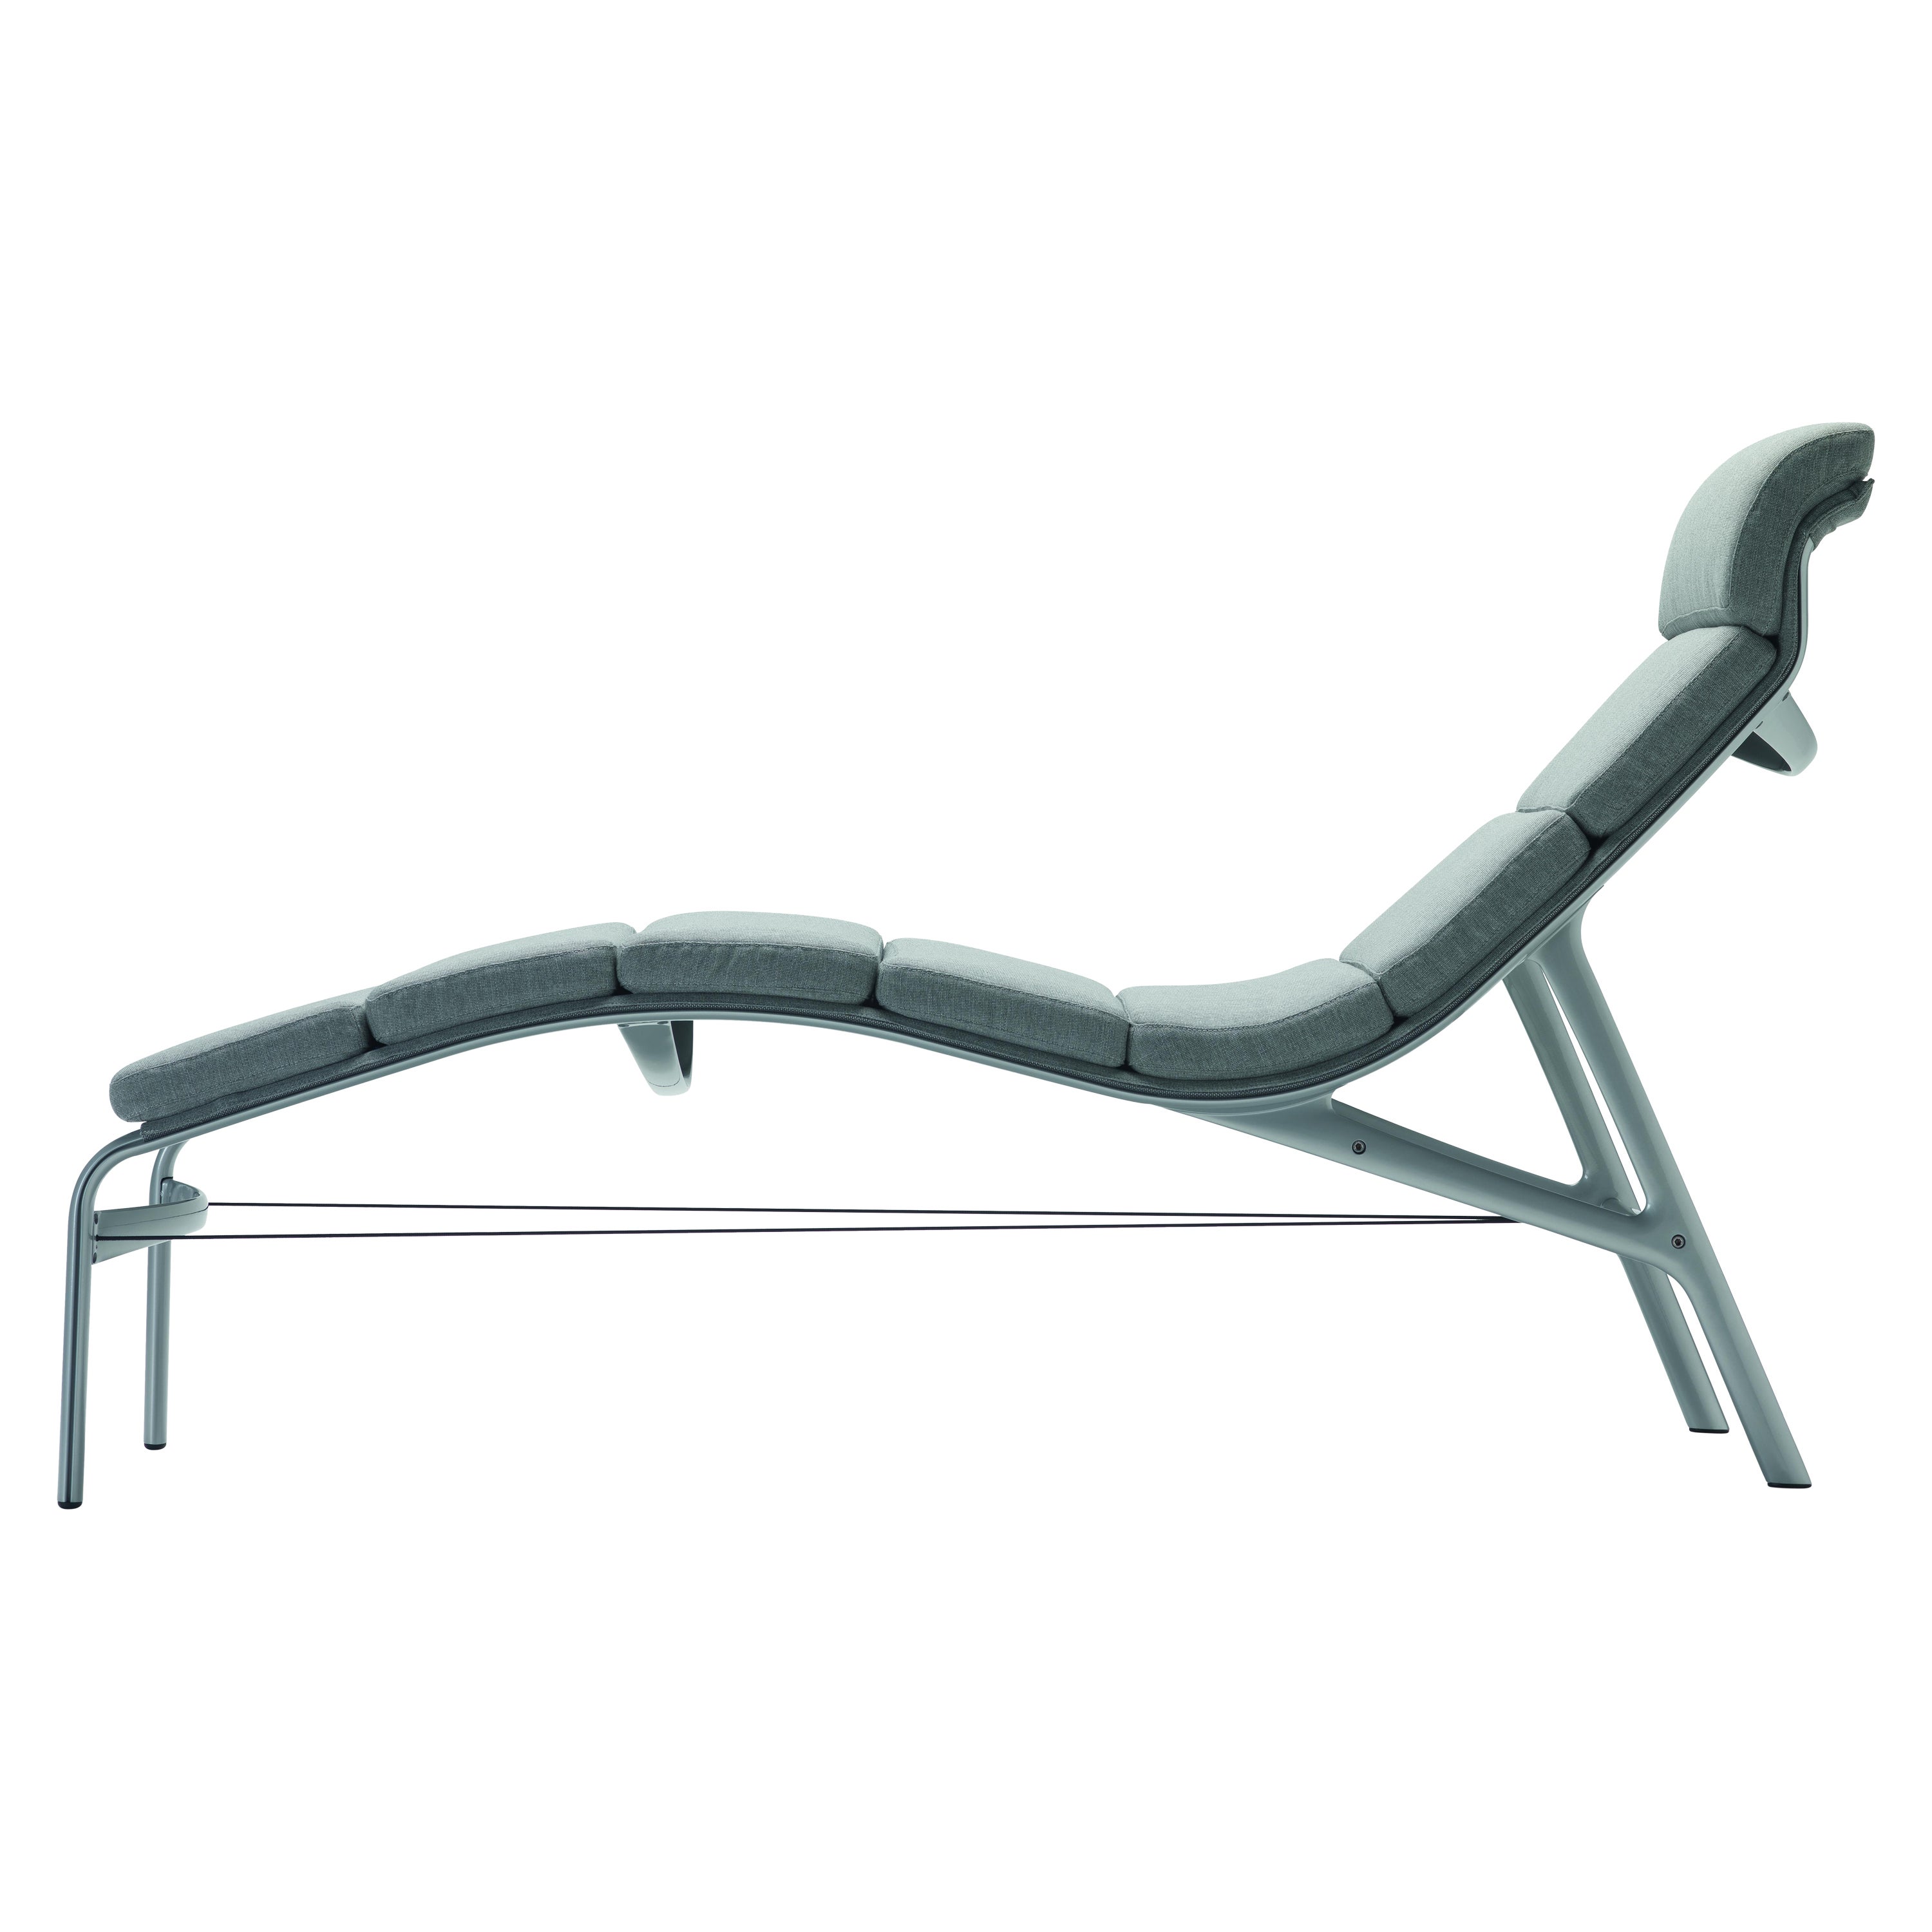 Alias 414 Longframe Soft Outdoor Chair in Grey Fabric & Lacquered Aluminum Frame For Sale